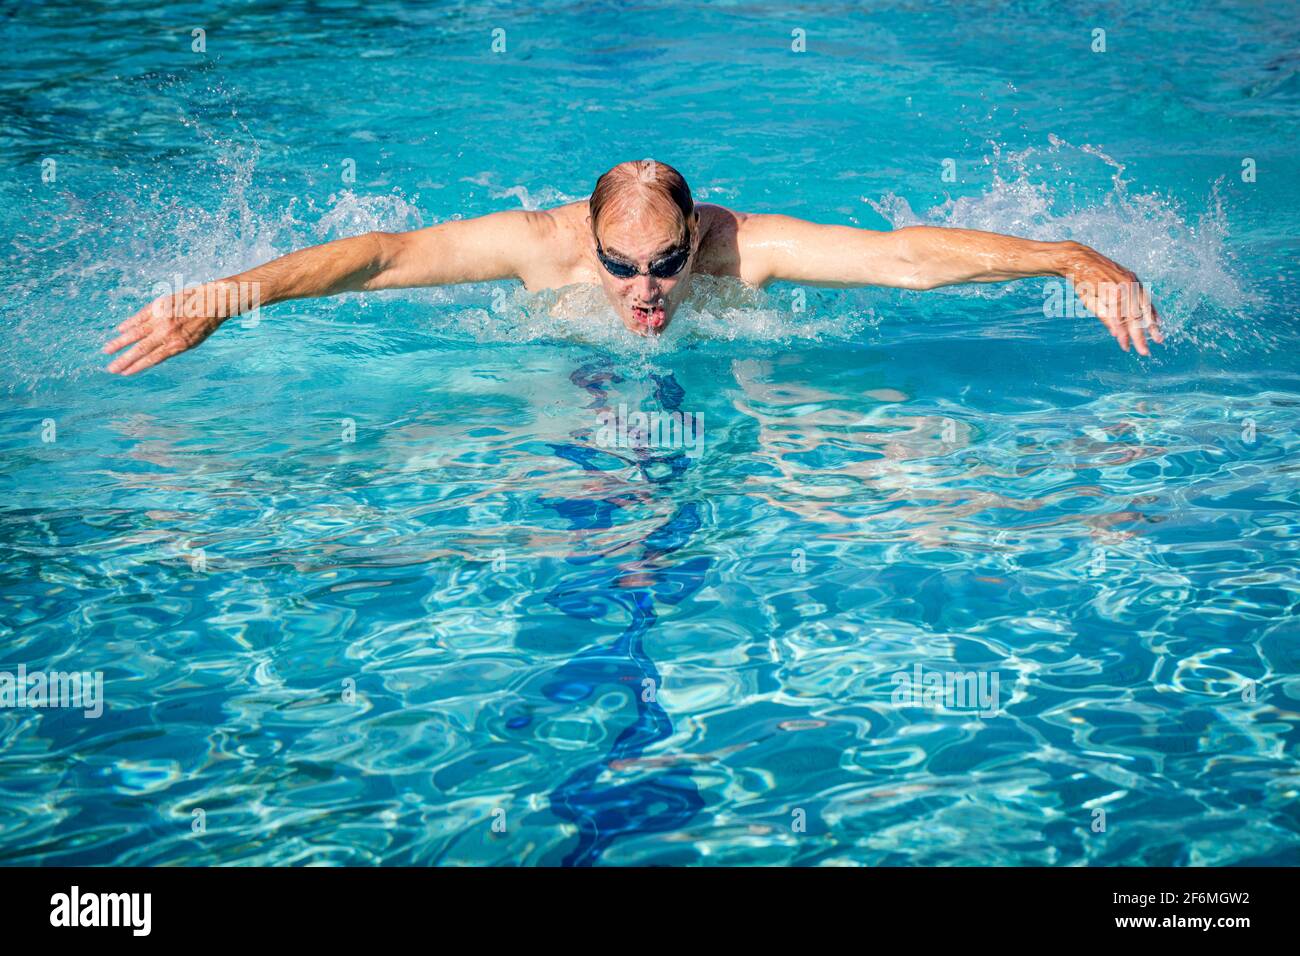 Older man swimming laps using the Butterfly Stroke in a lap pool, Naples, Florida, USA Stock Photo